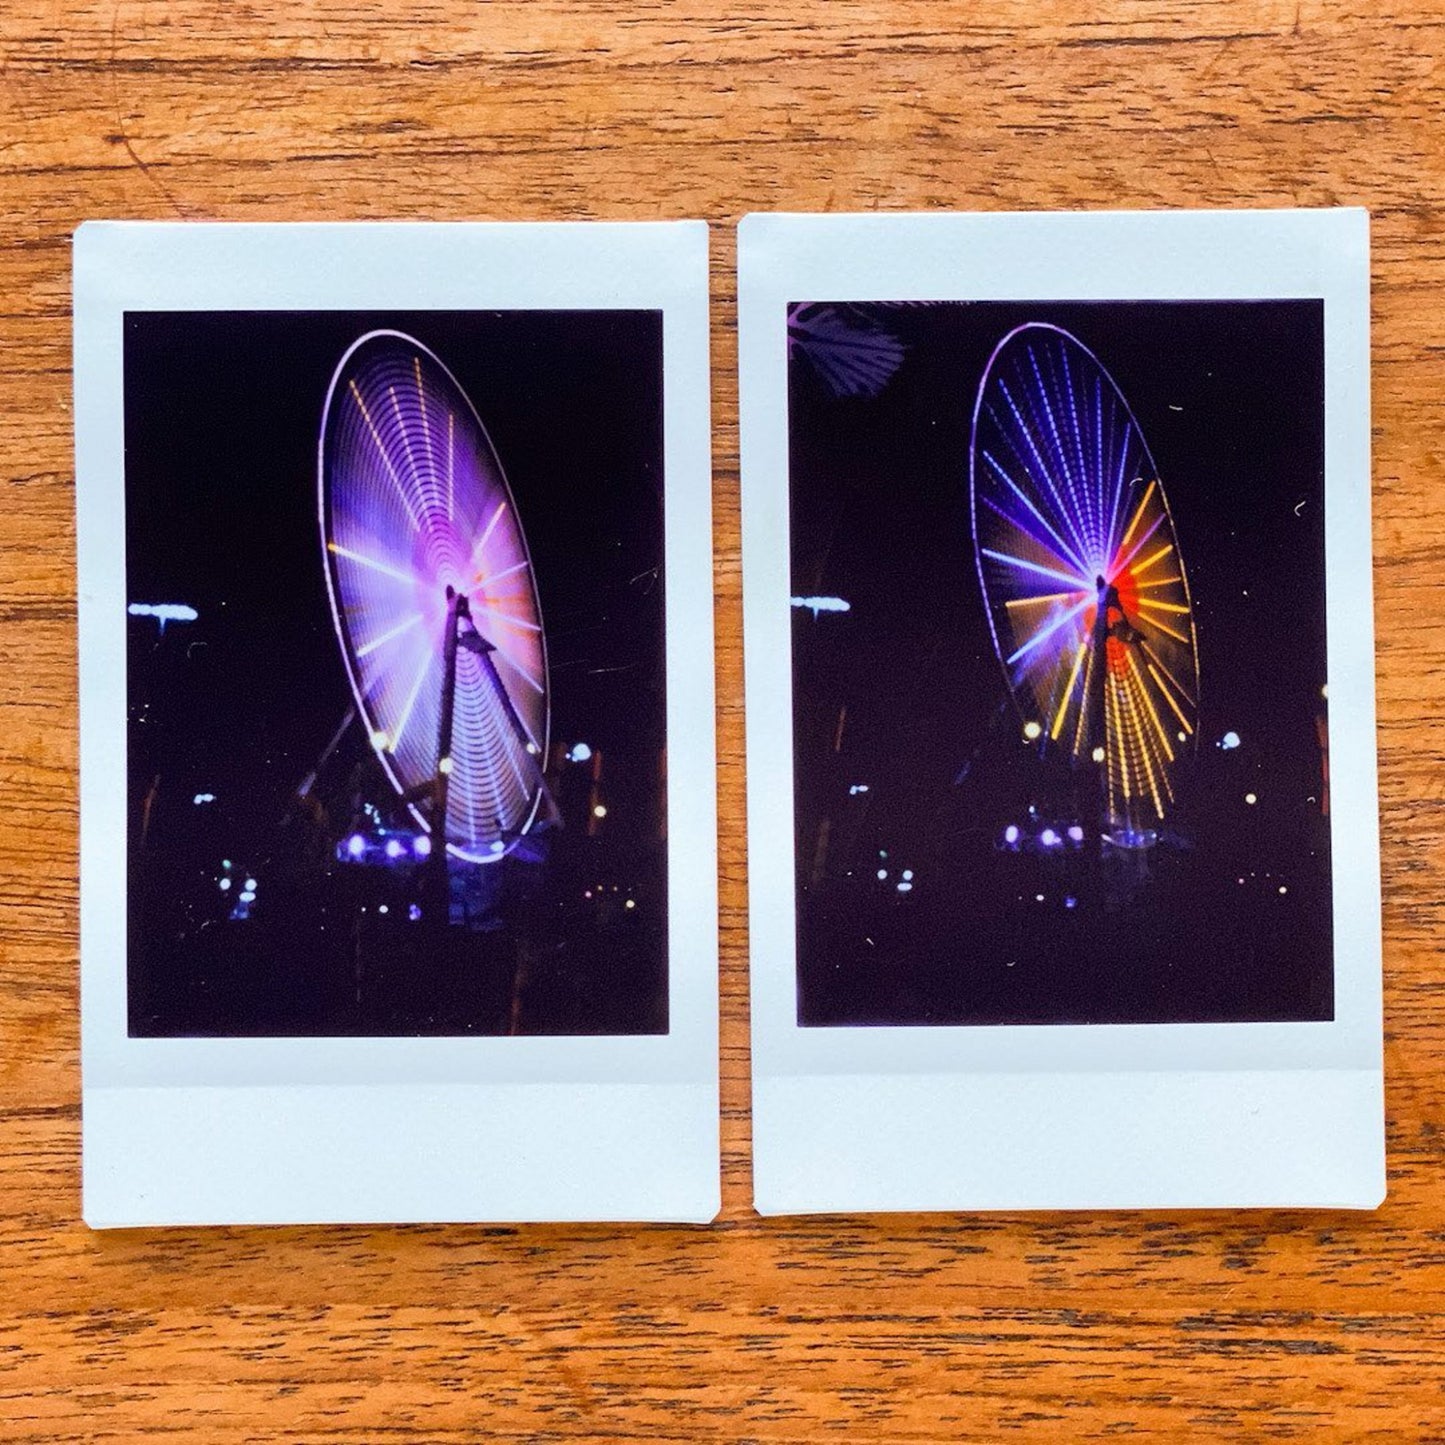 Two instant photos taken with a Jollylook Pinhole Mini camera, positioned on a table, highlighting the rustic and nostalgic charm of a Wagon Wheel